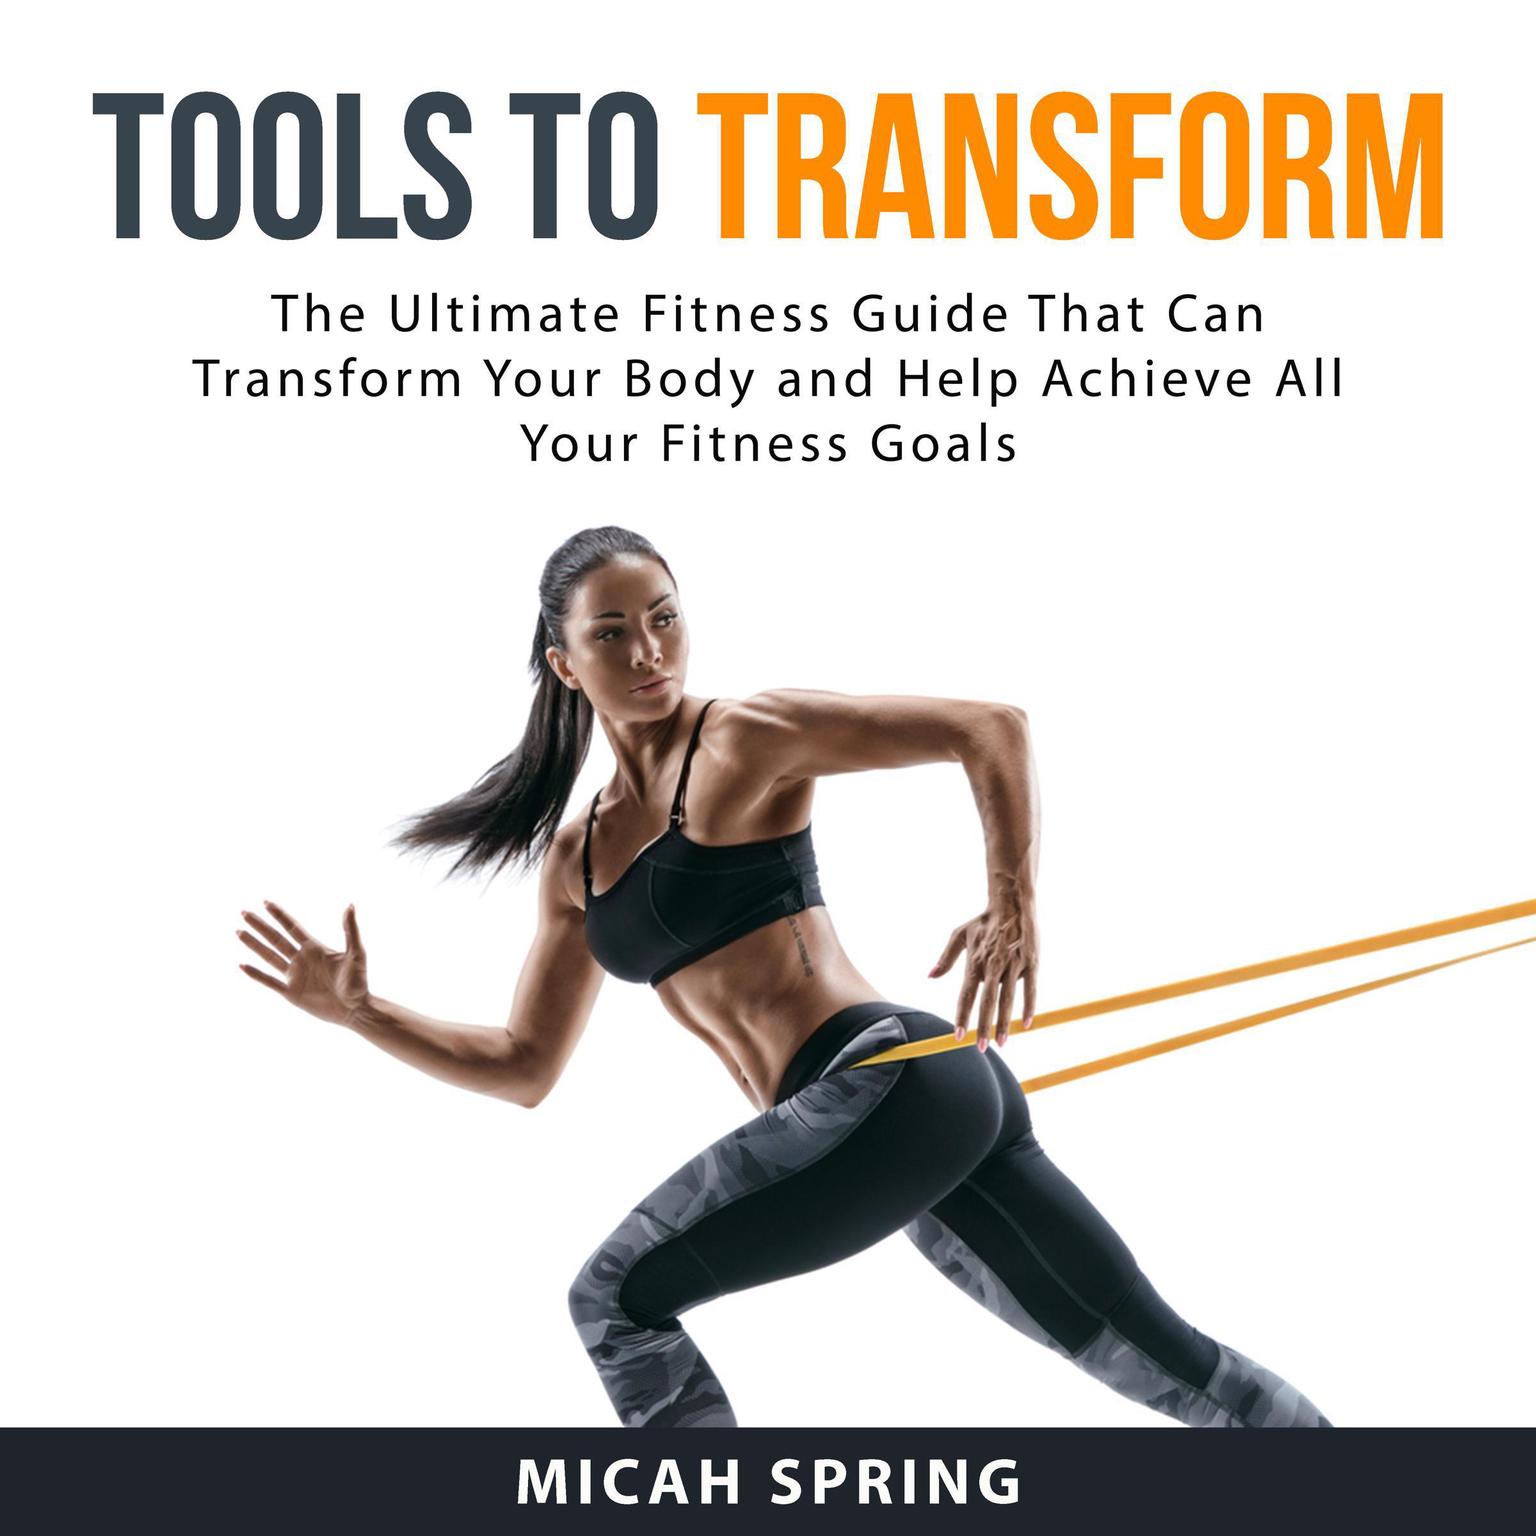 Tools to Transform: The Ultimate Fitness Guide That Can Transform Your Body and Help Achieve All Your Fitness Goals Audiobook, by Micah Spring